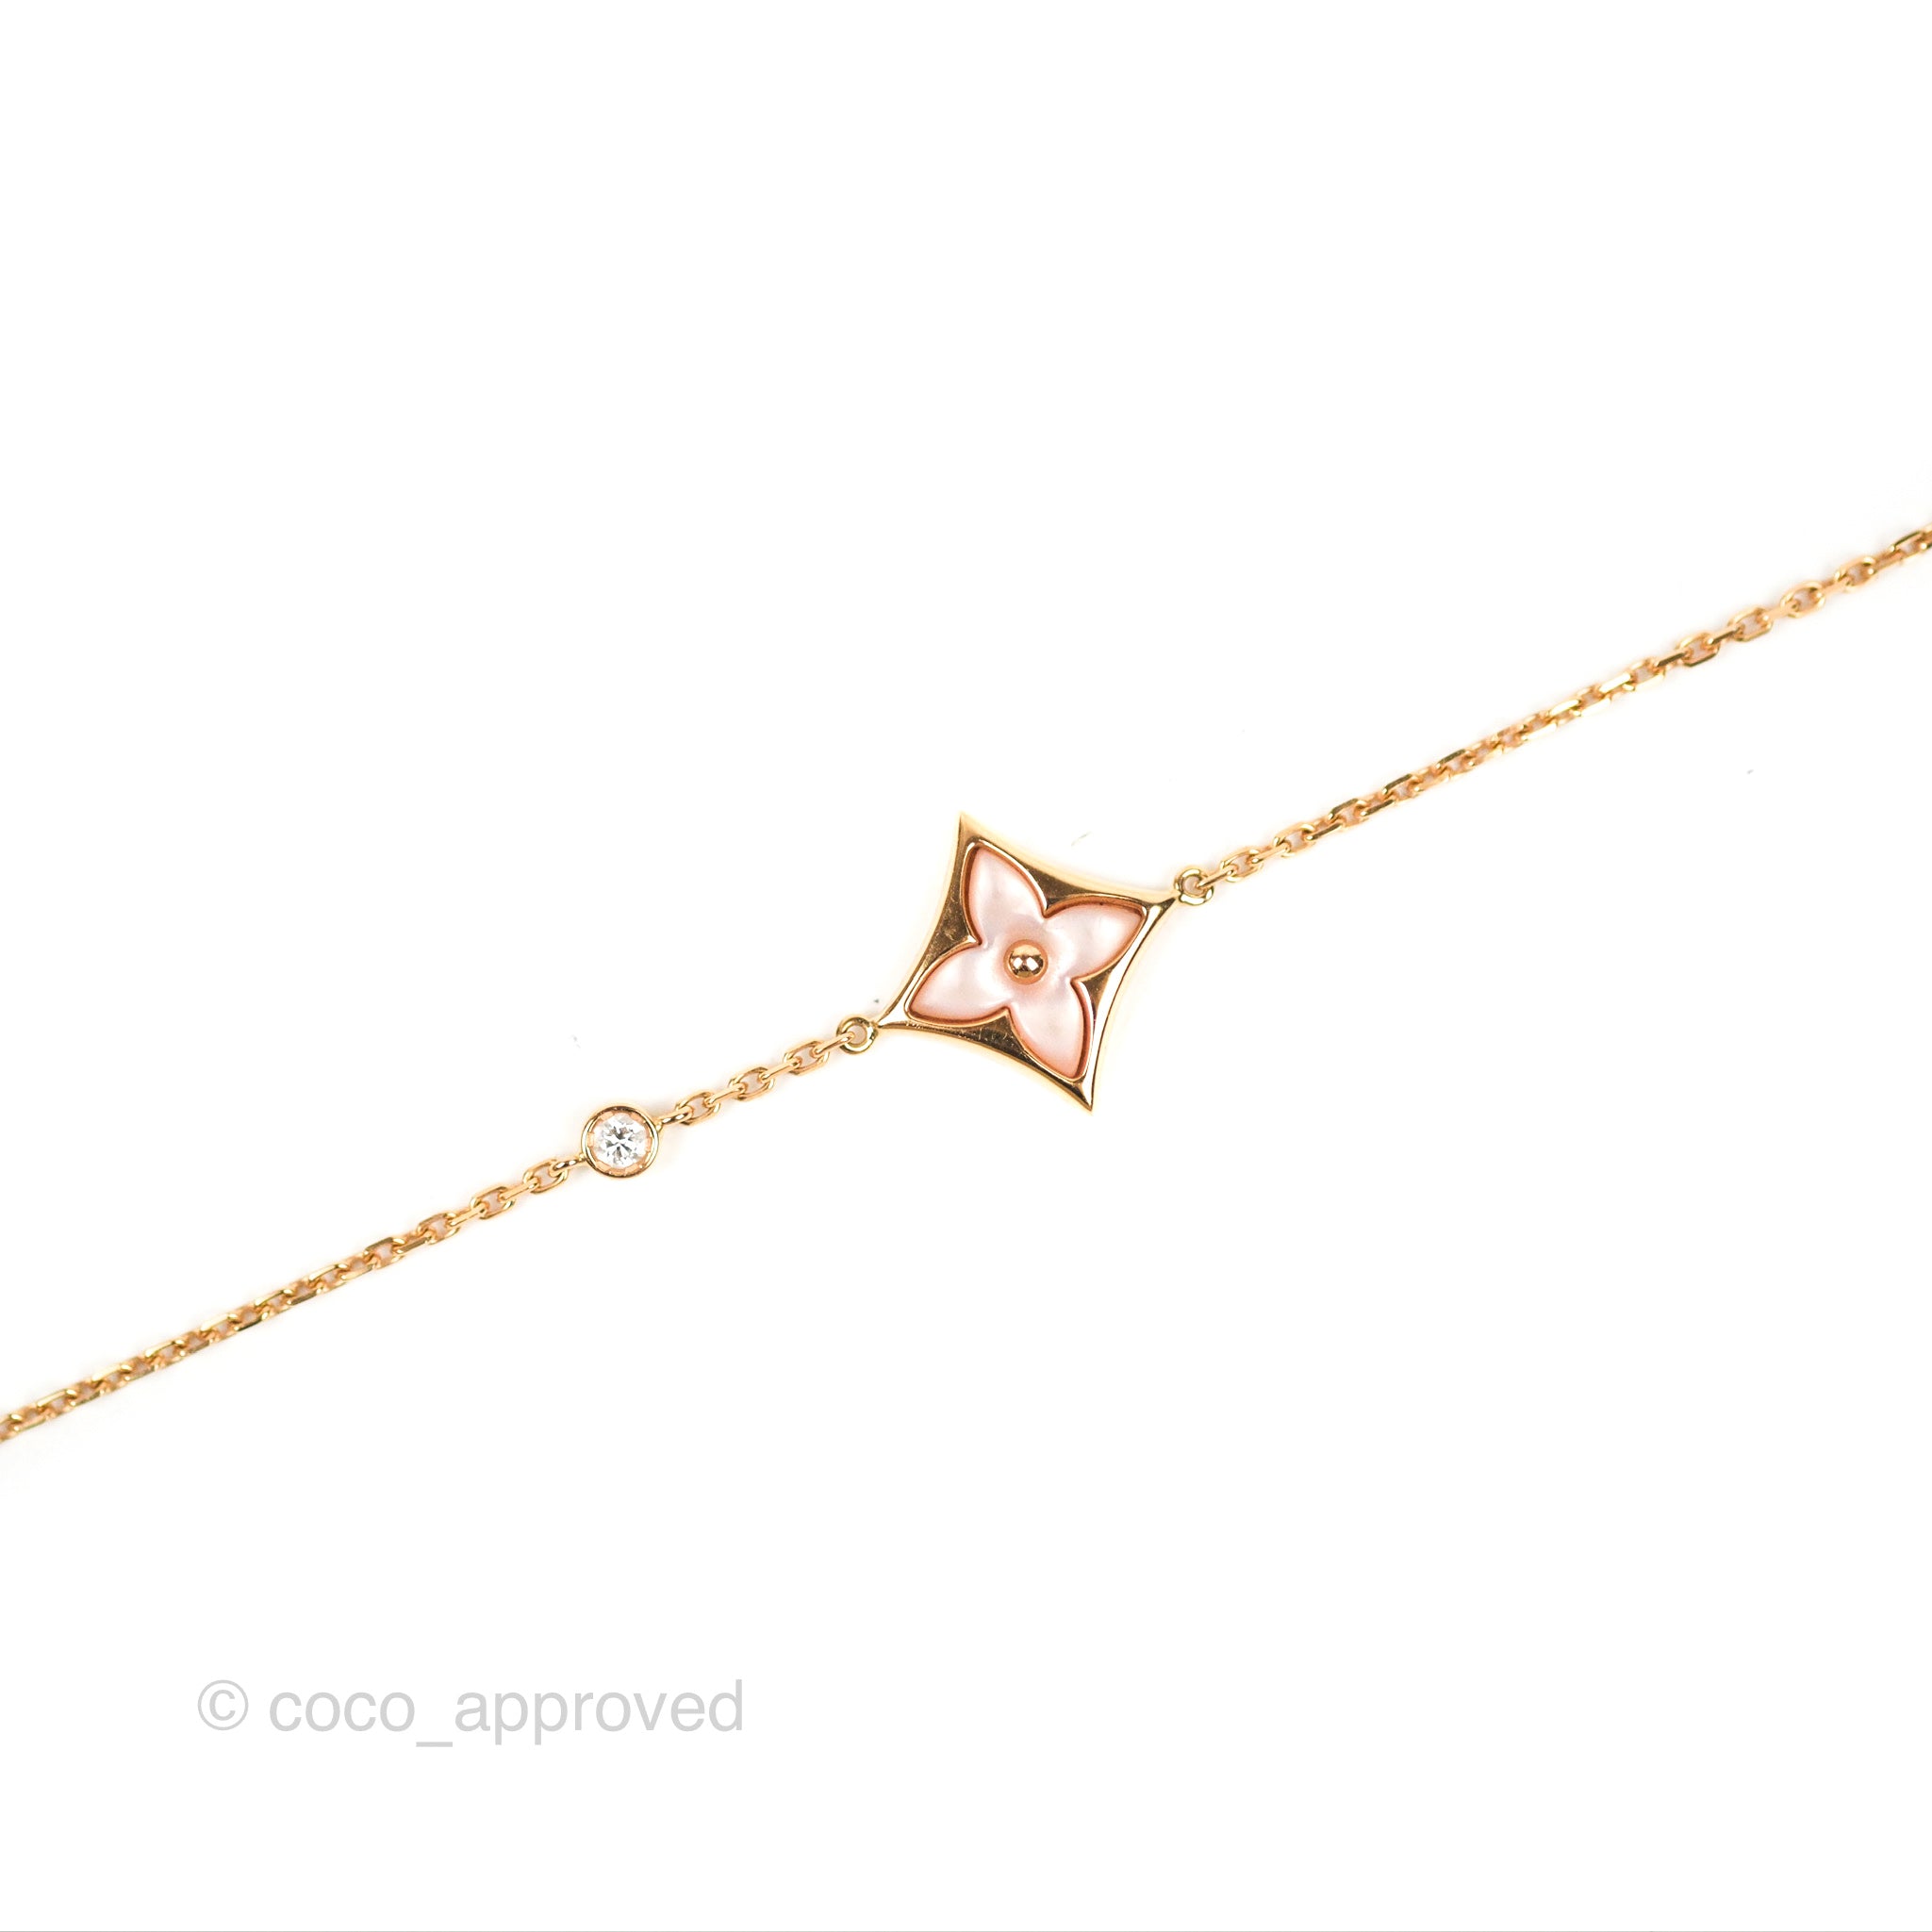 Louis Vuitton Color Blossom Star Bracelet, Pink Gold and White Mother-of-Pearl Pink. Size SA